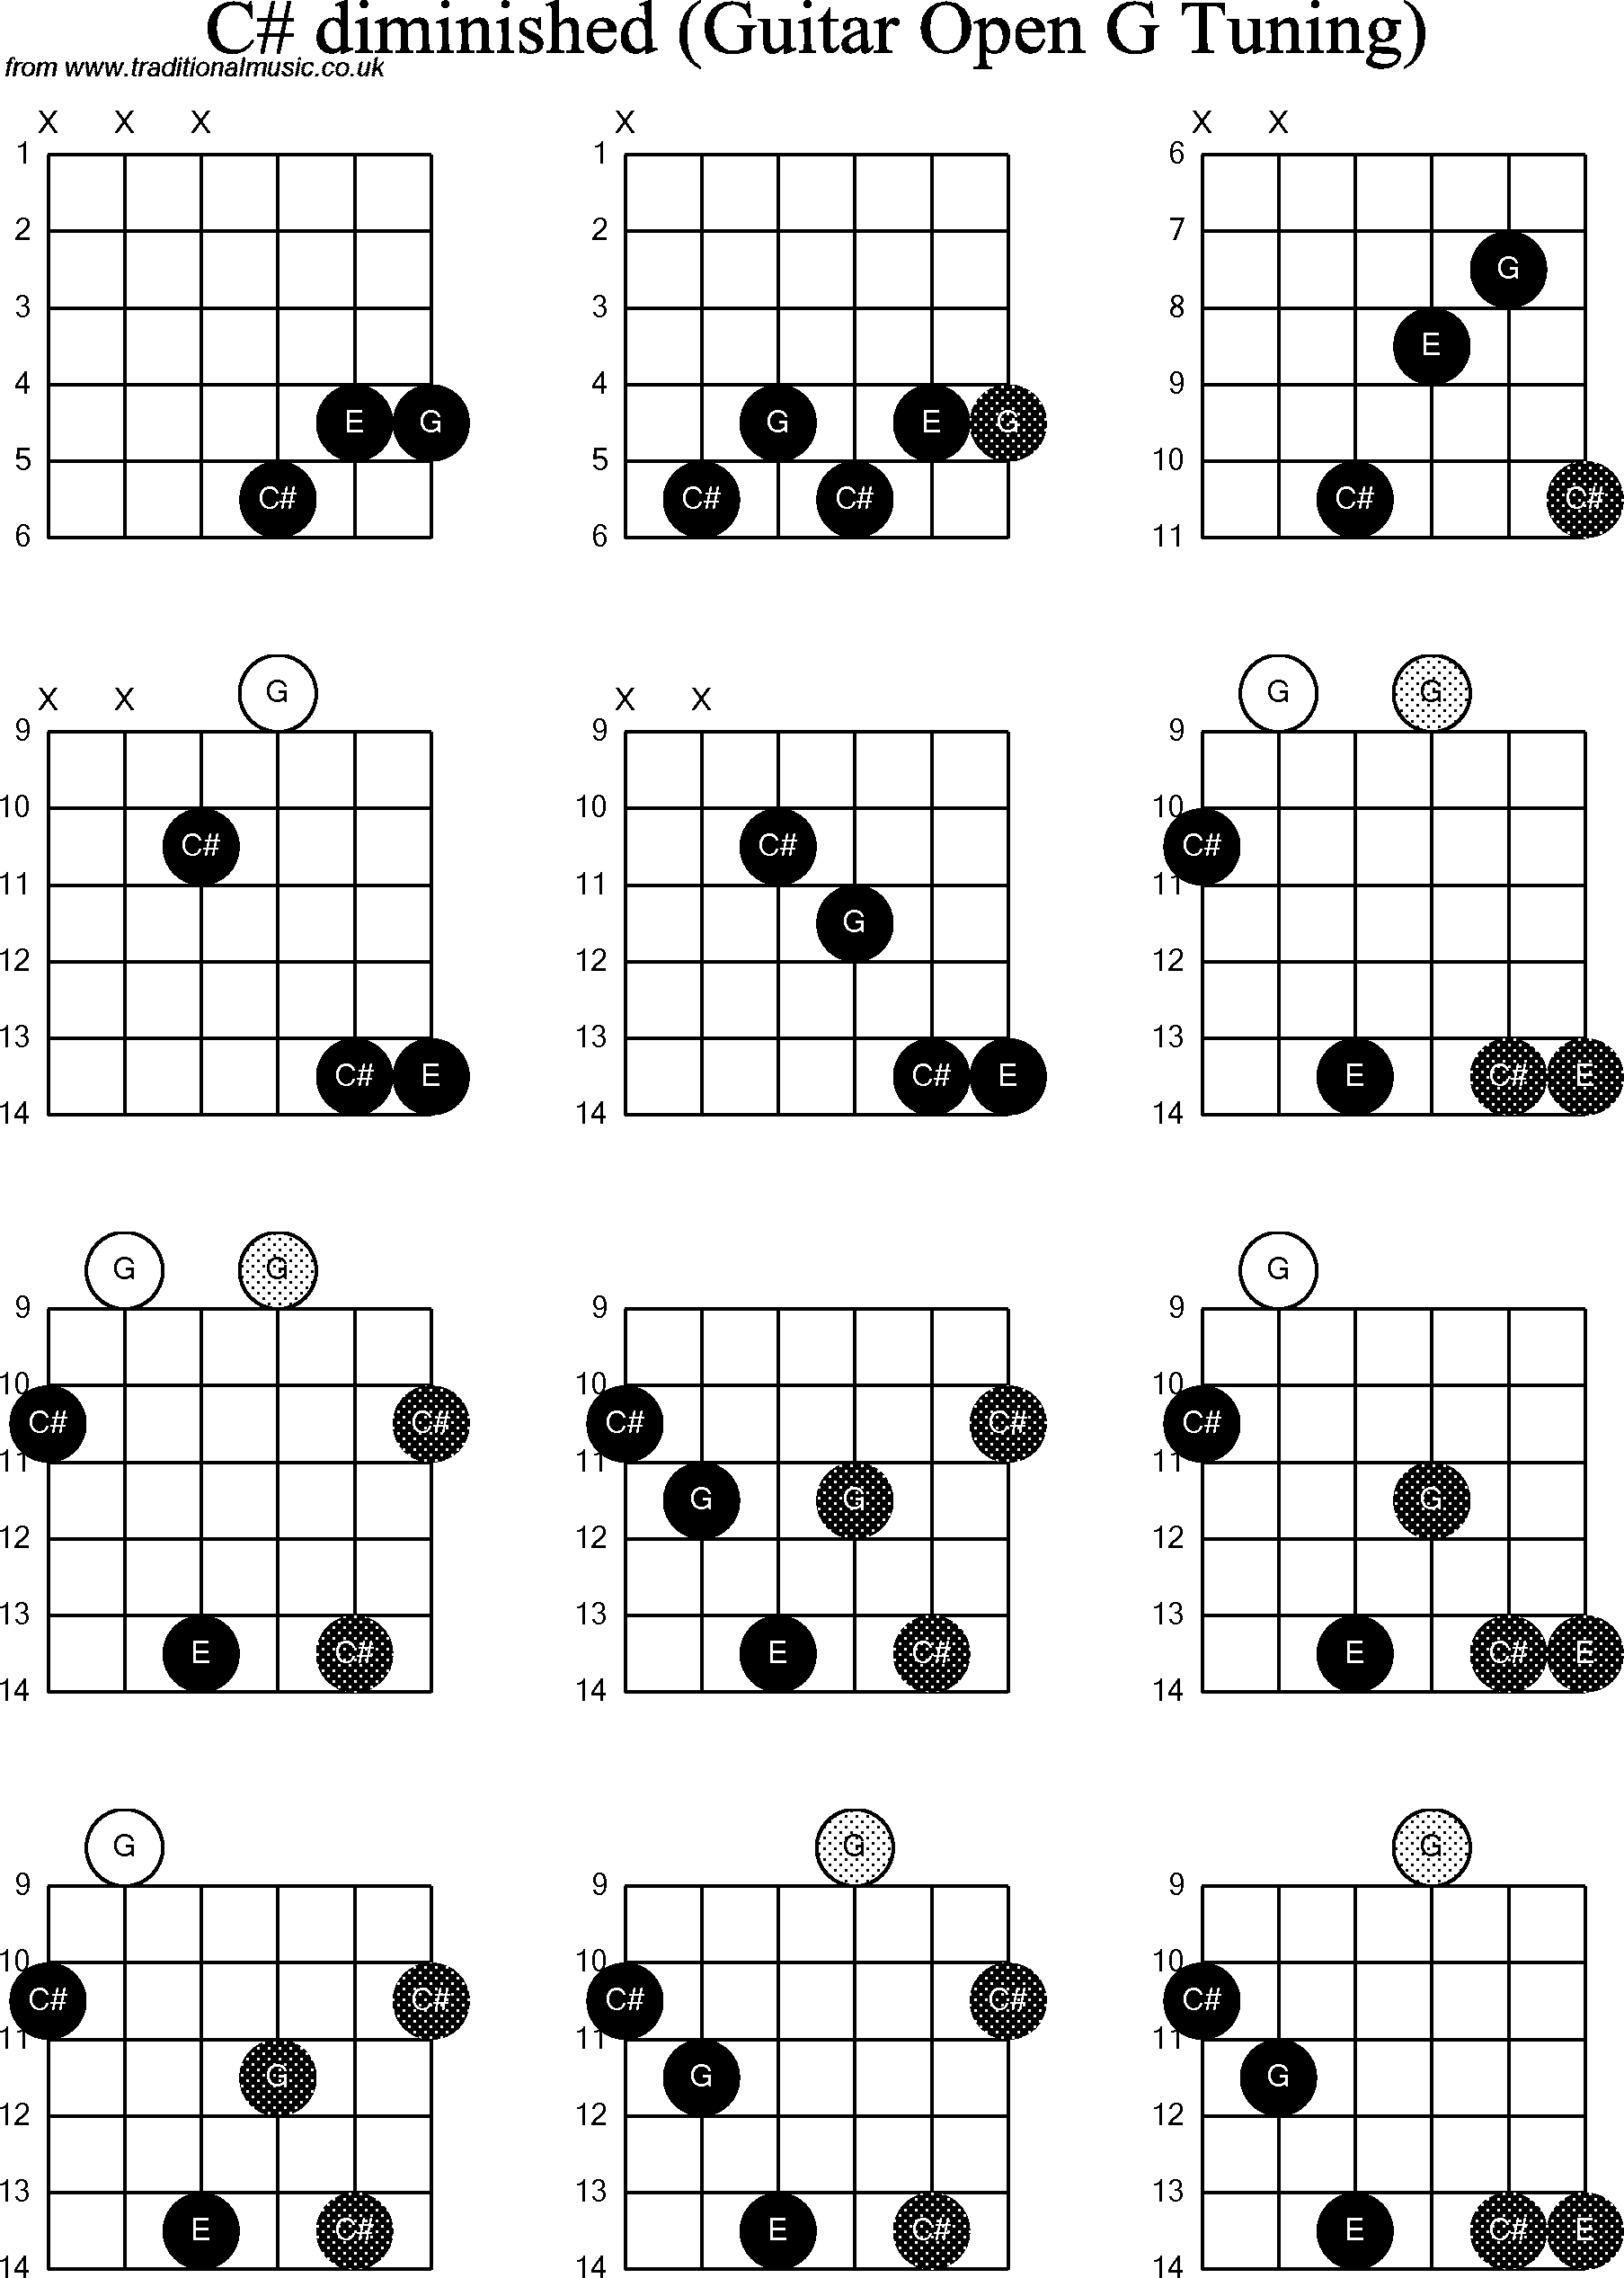 Chord diagrams for Dobro C# Diminished